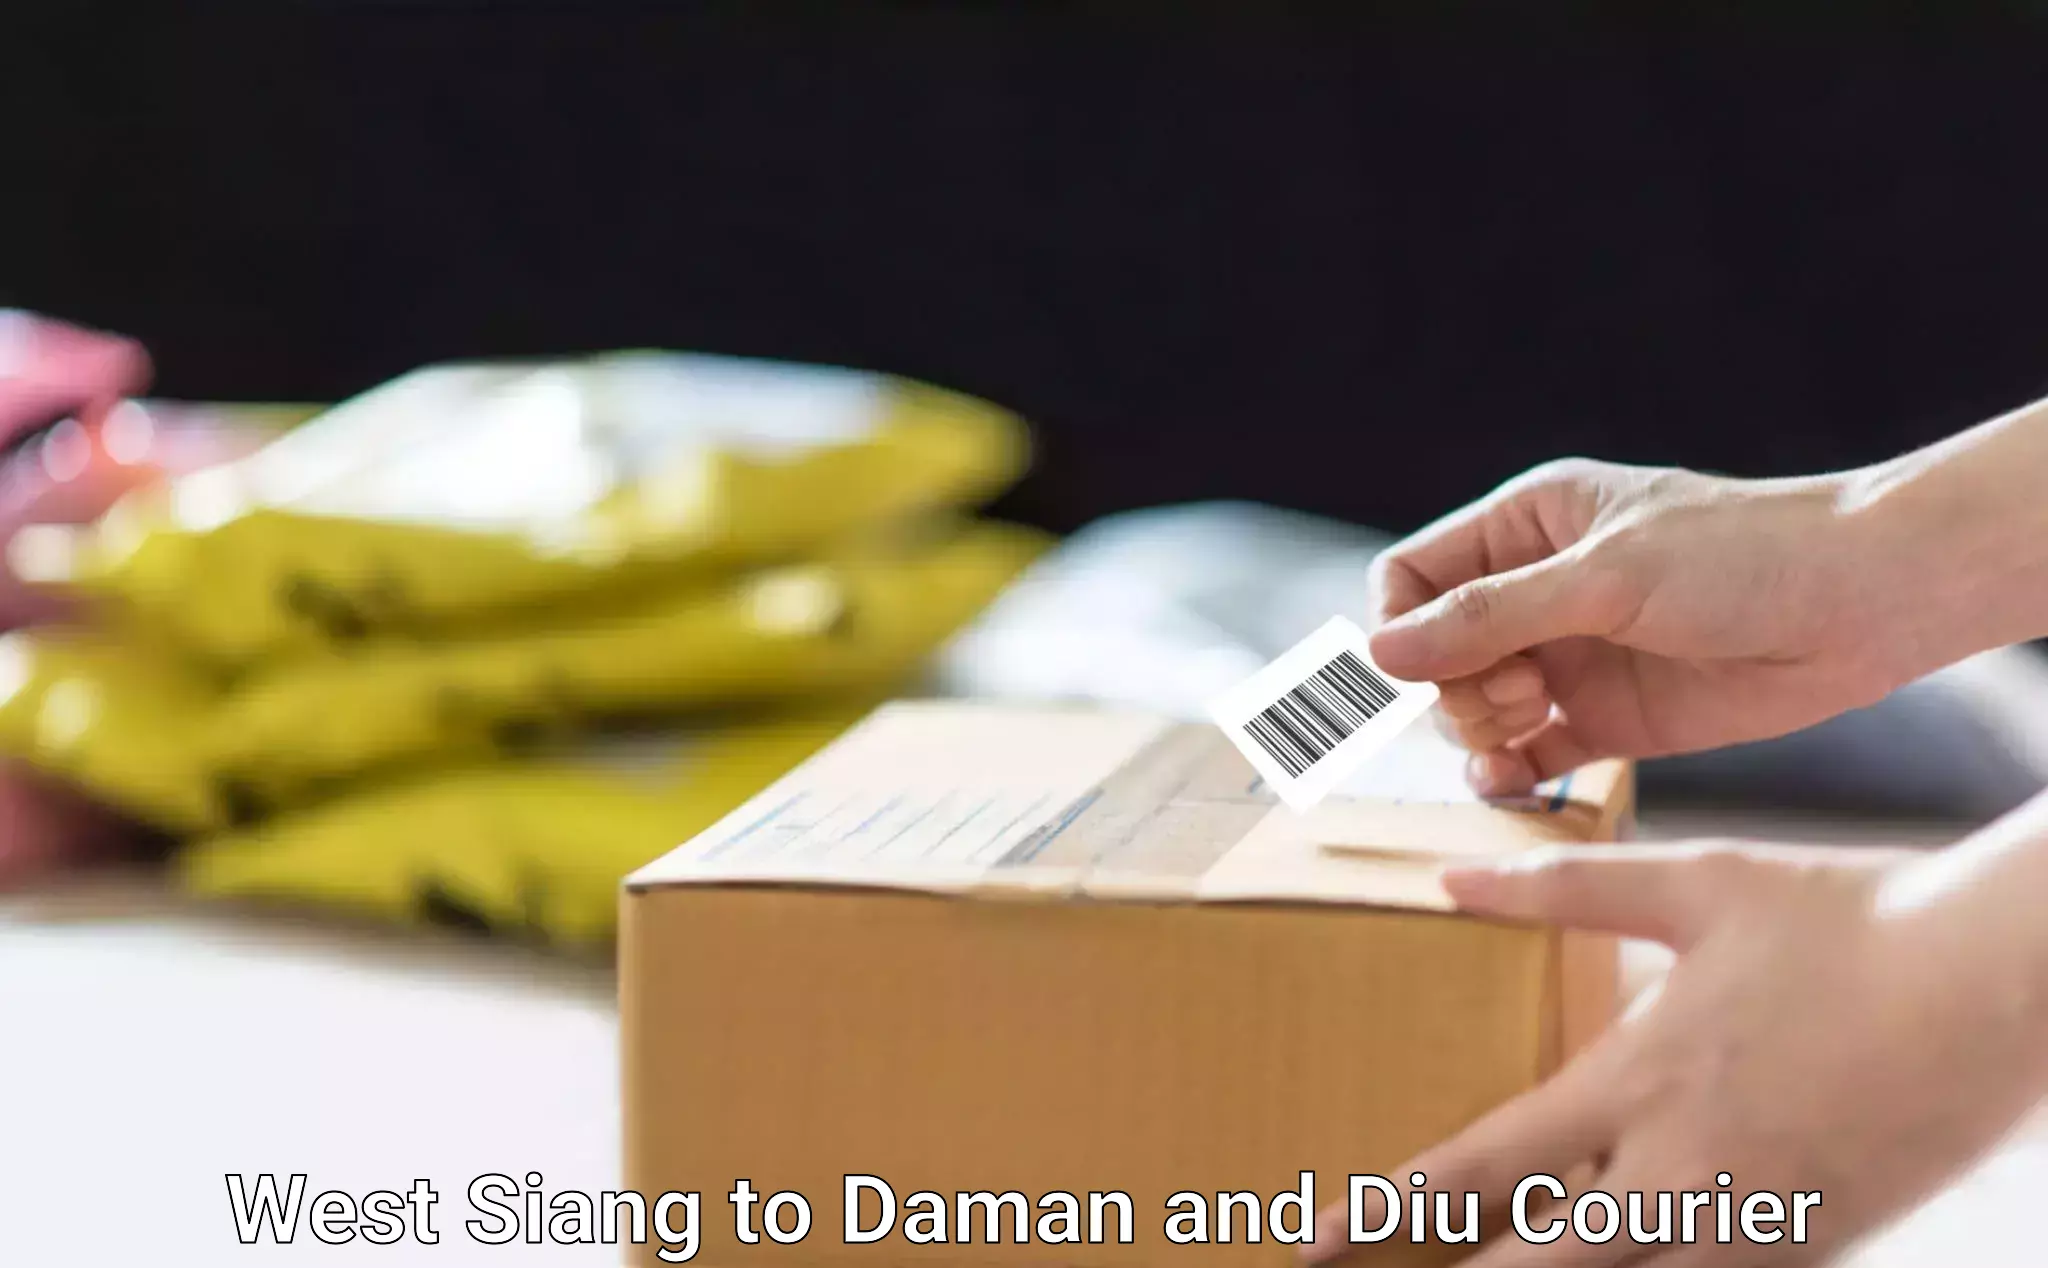 Domestic courier West Siang to Daman and Diu